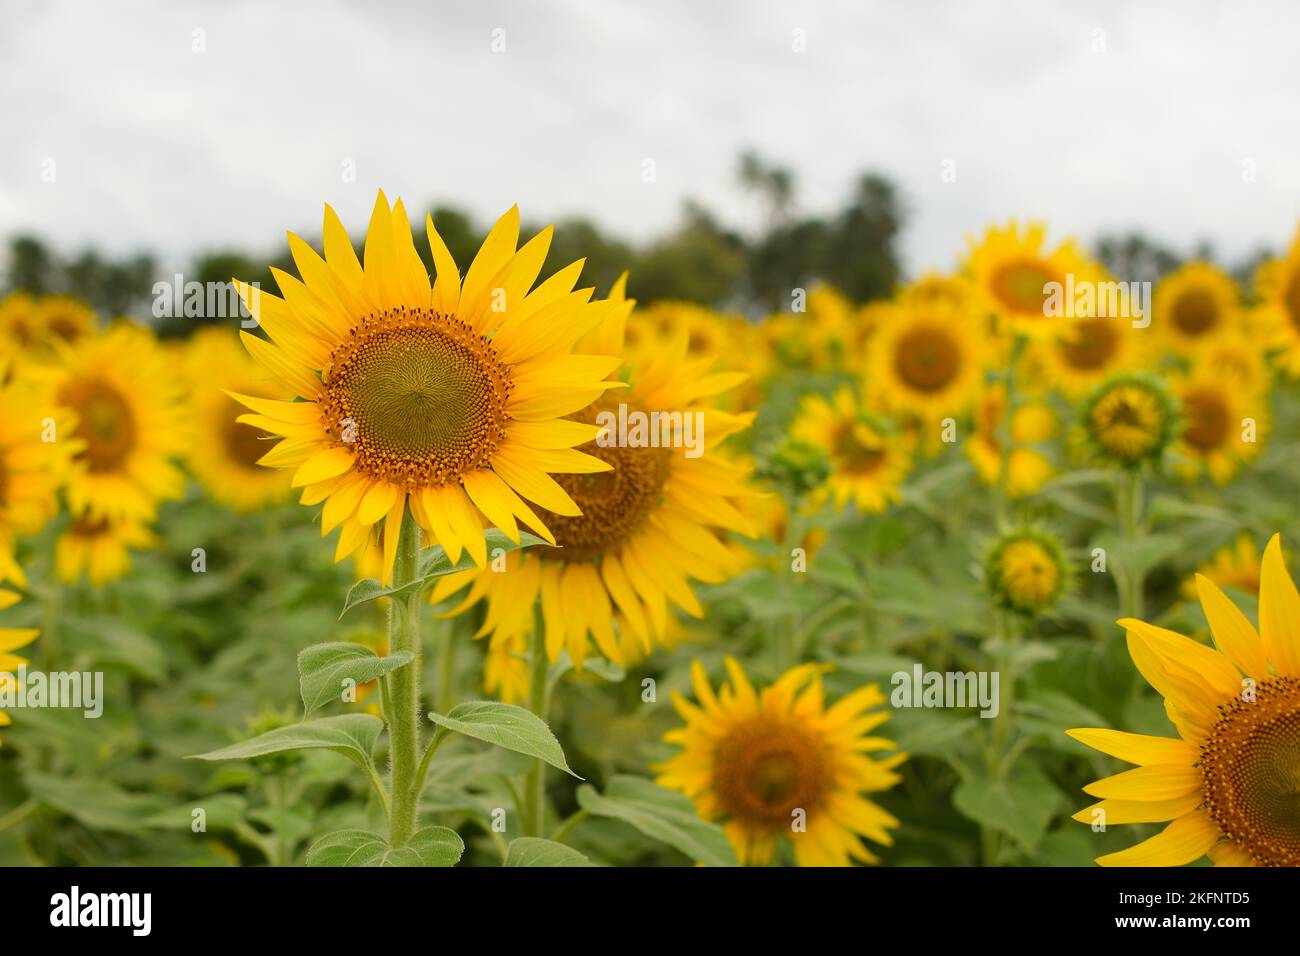 sunflower field,beautiful sunflowers bloom and dancing in wind under sunlight Stock Photo